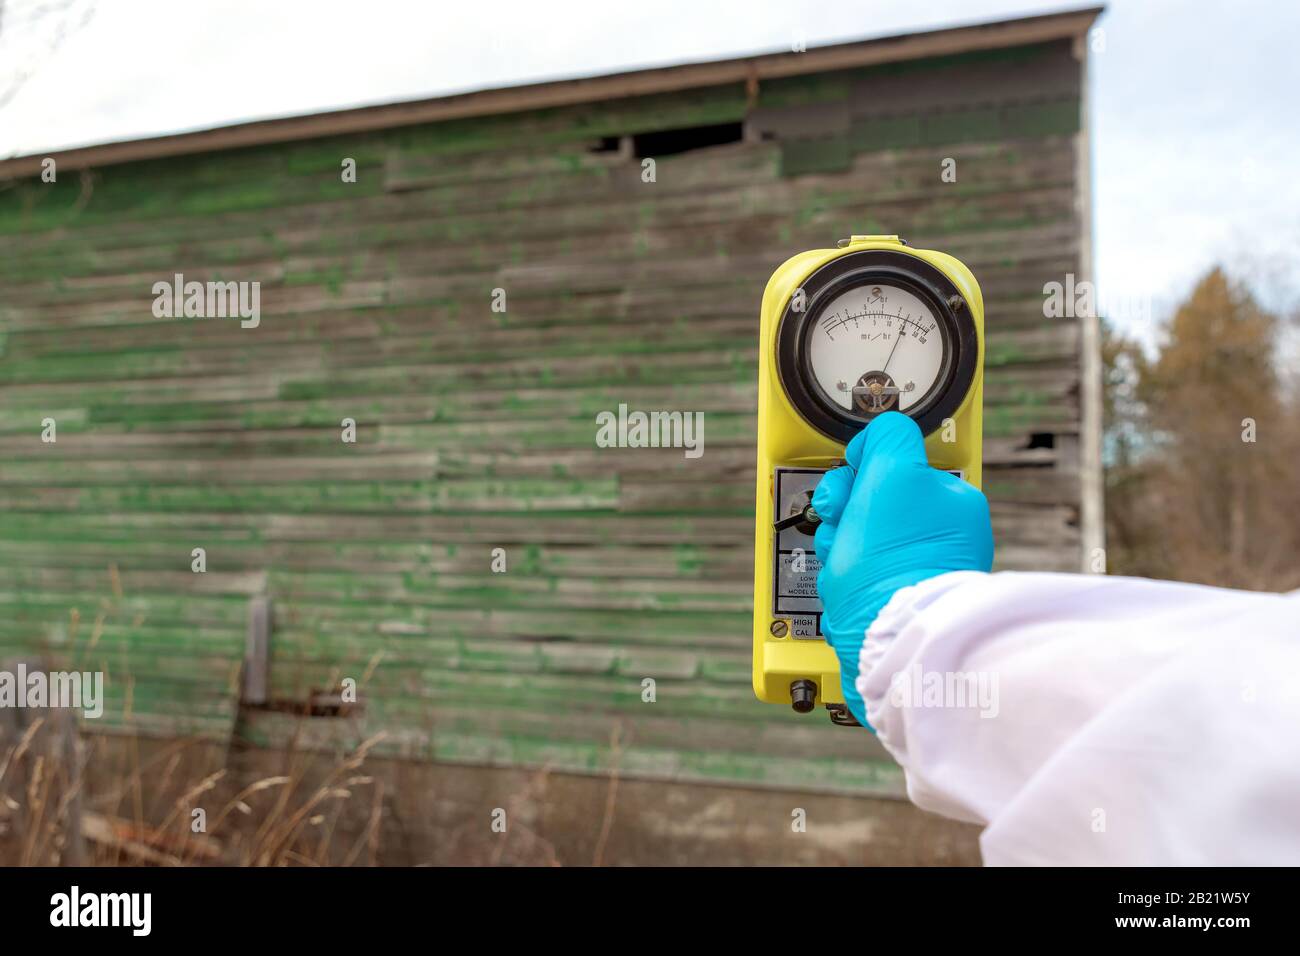 Measuring radiation at an old building. Blue gloved hand holds a radiation meter up to an old building, the needle shows a large amount of radiation. Stock Photo